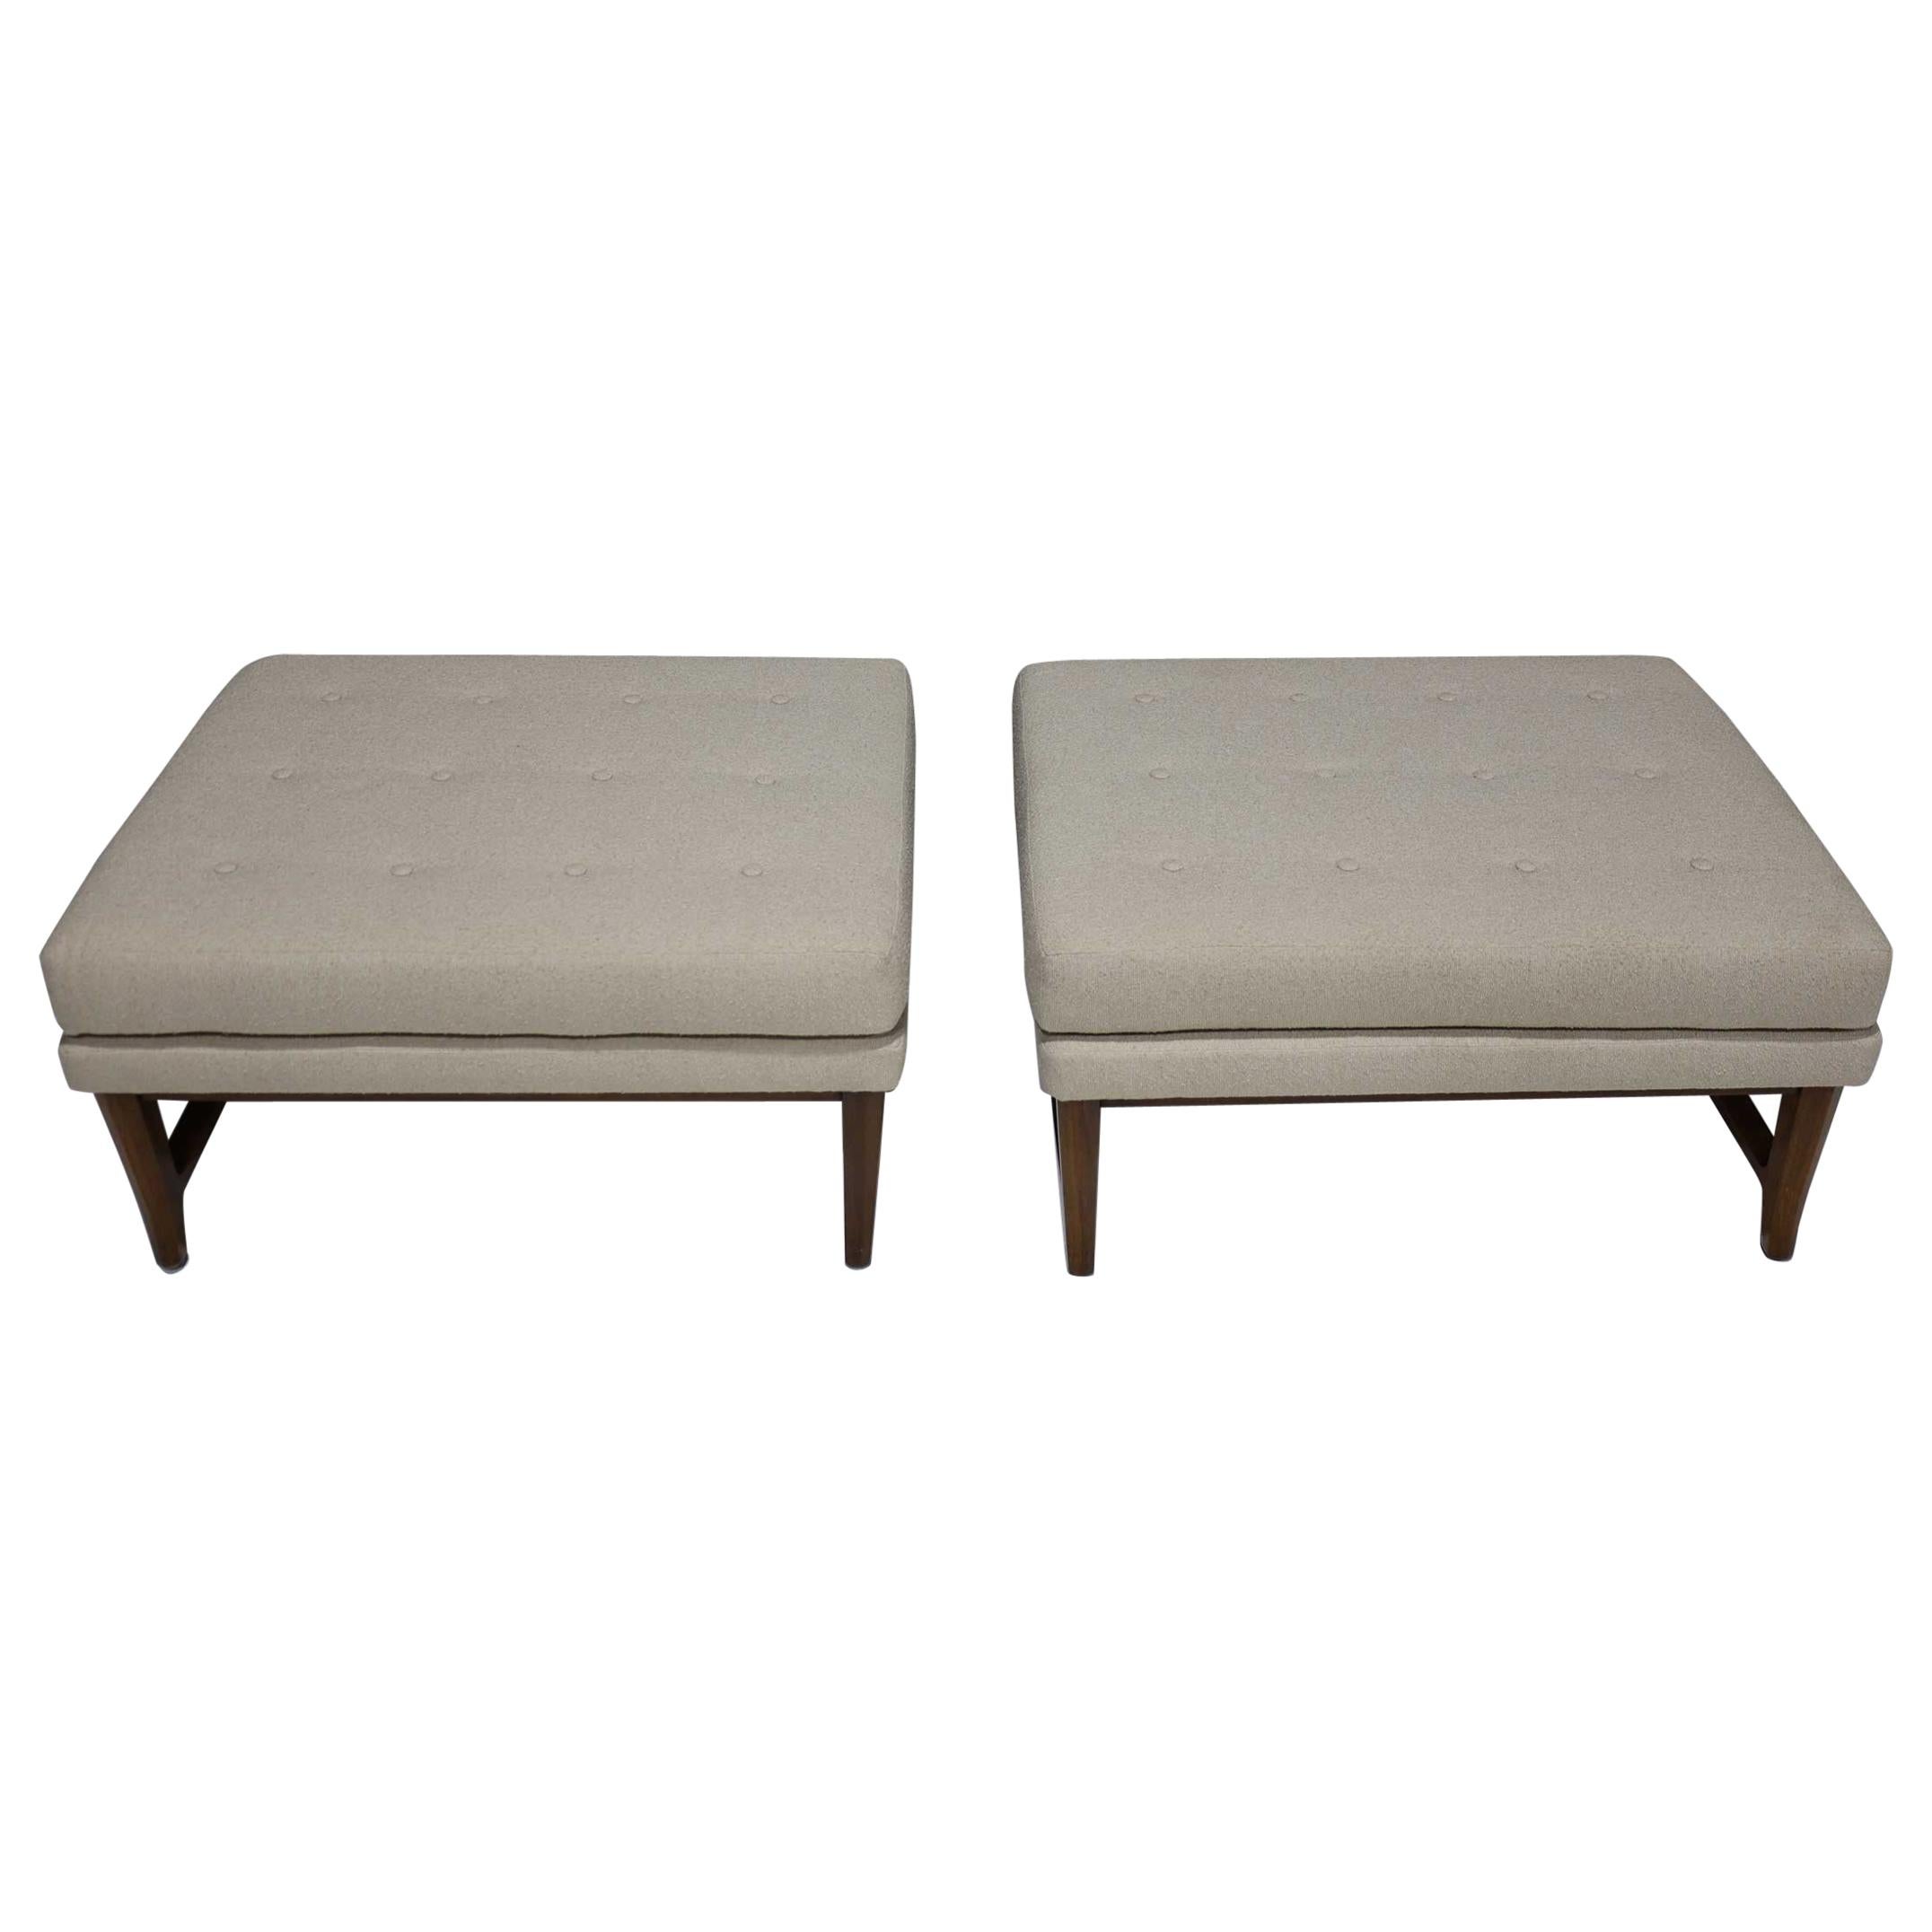 Pair of Edward Wormley for Dunbar Janus Collection Ottomans